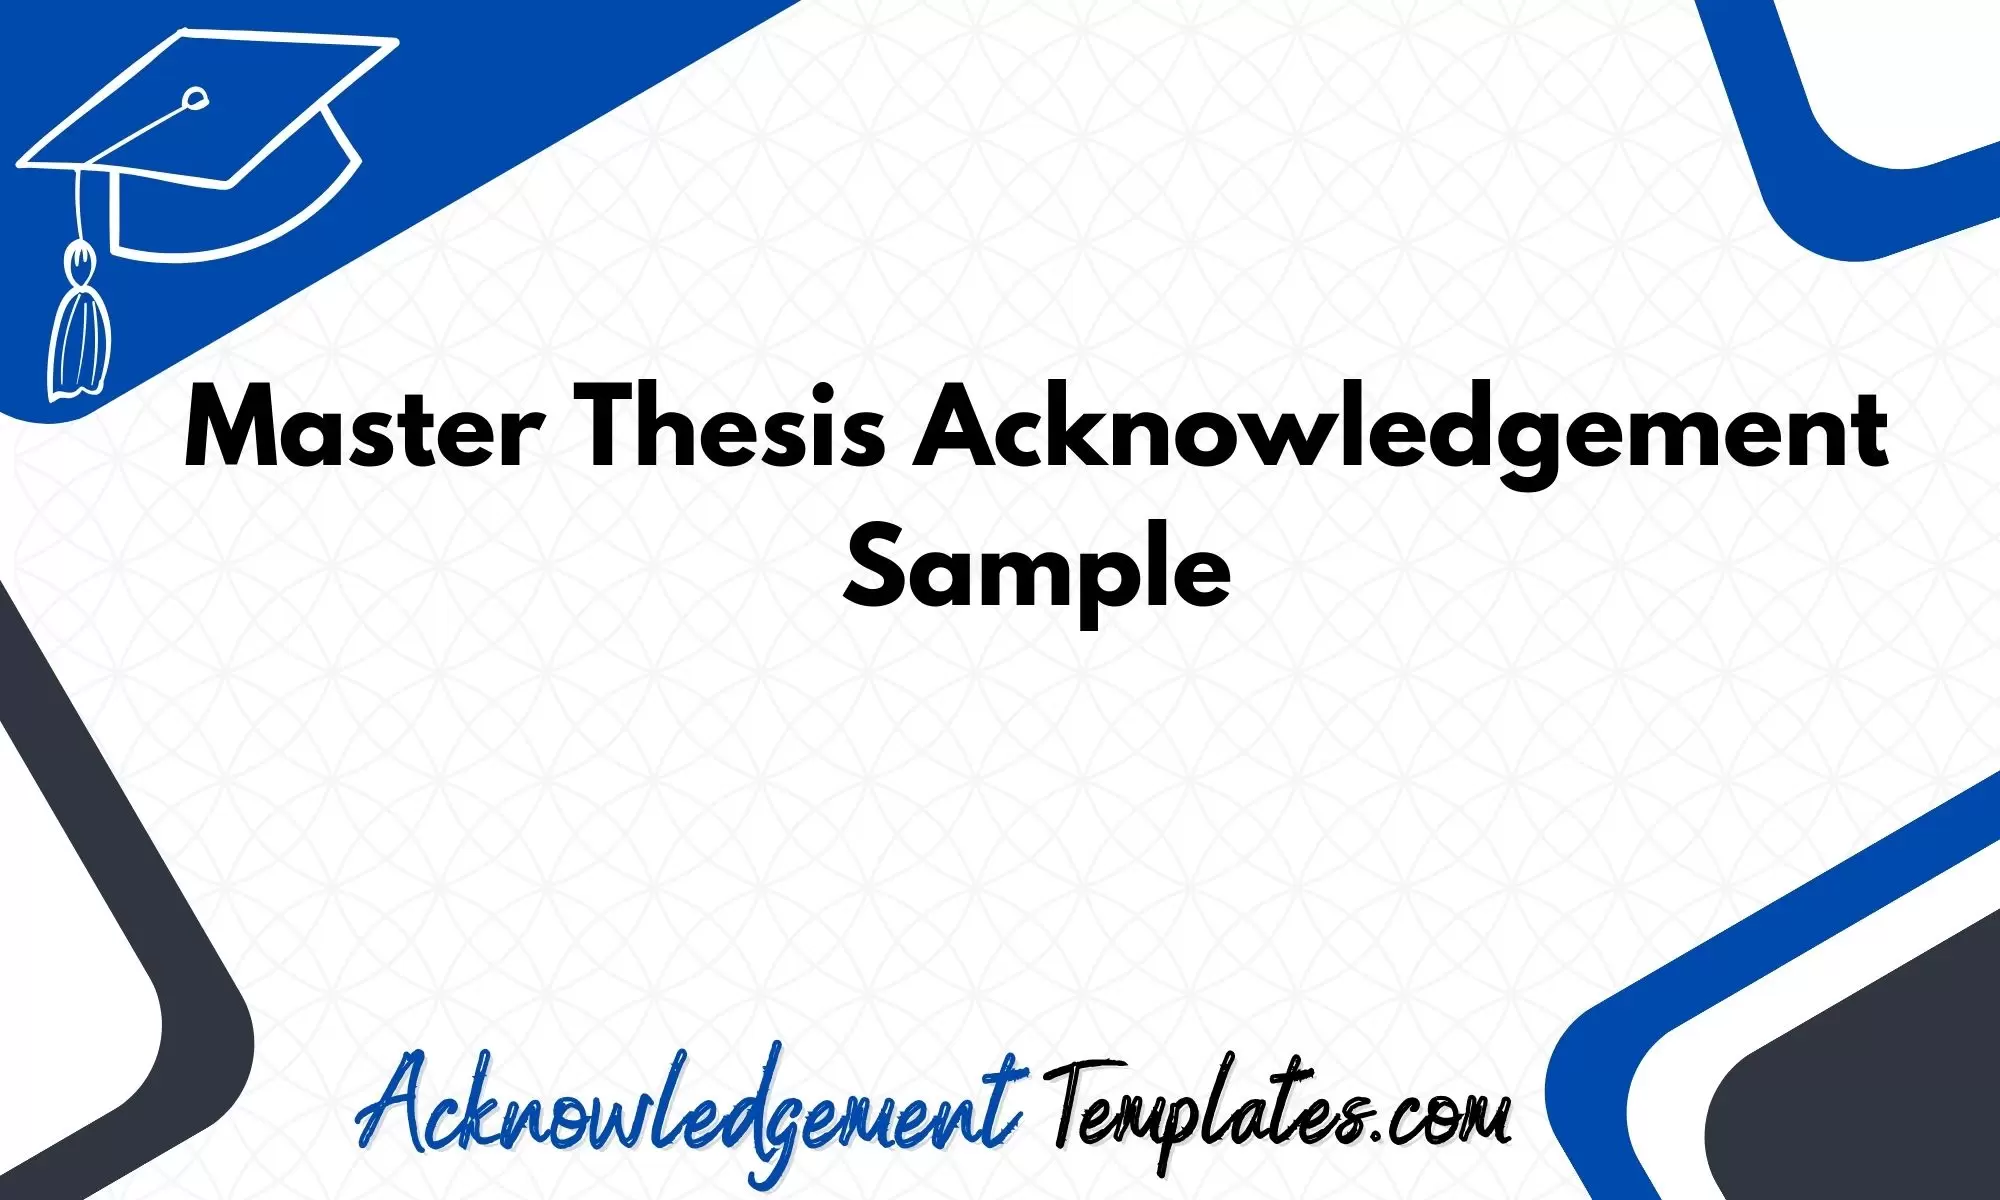 Master Thesis Acknowledgement Sample